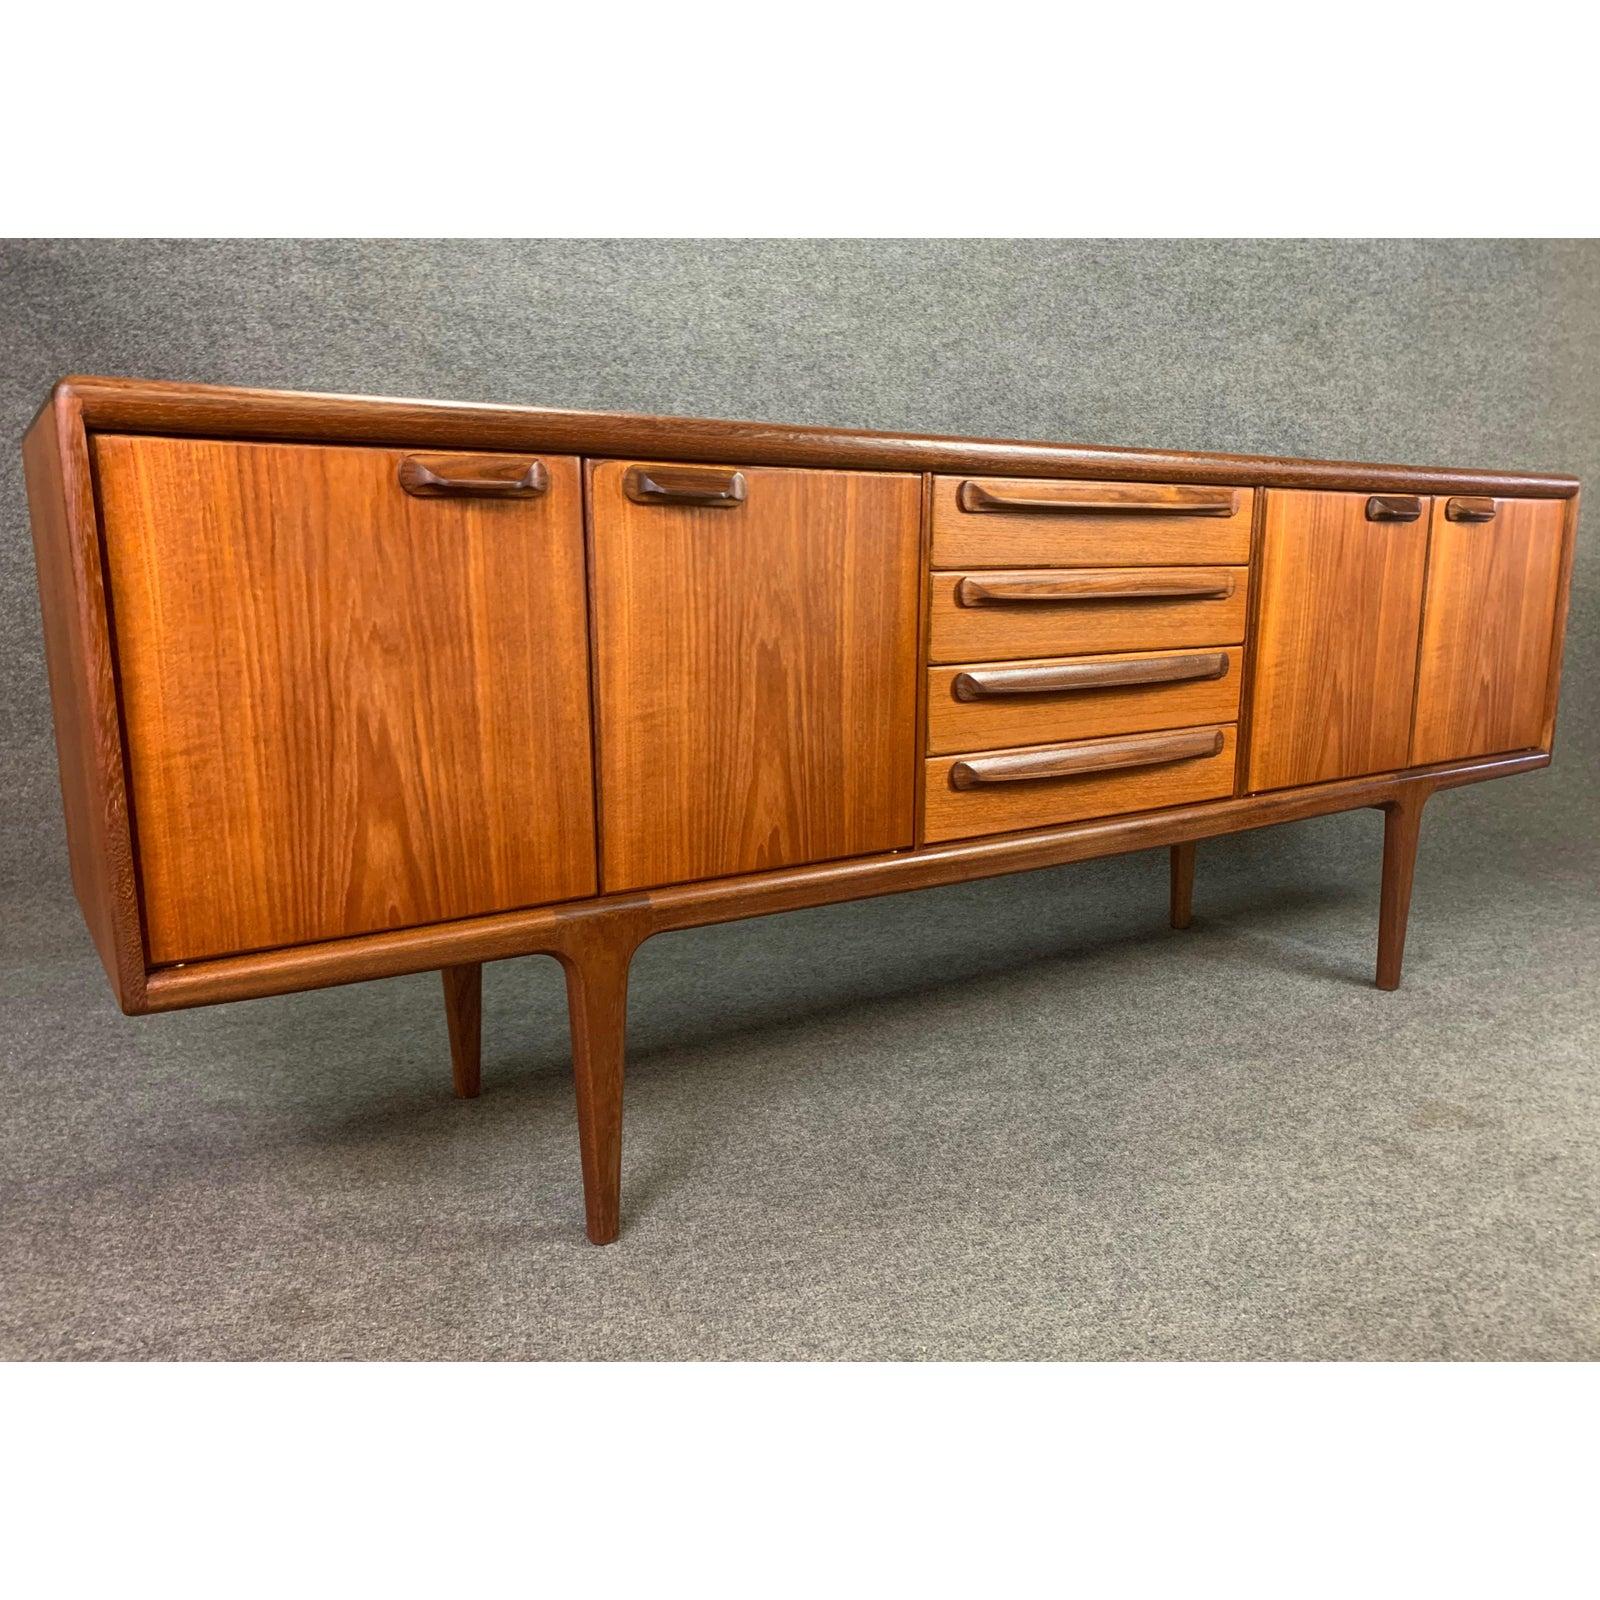 Here is a beautiful Mid-Century Modern sideboard in teak part of the 